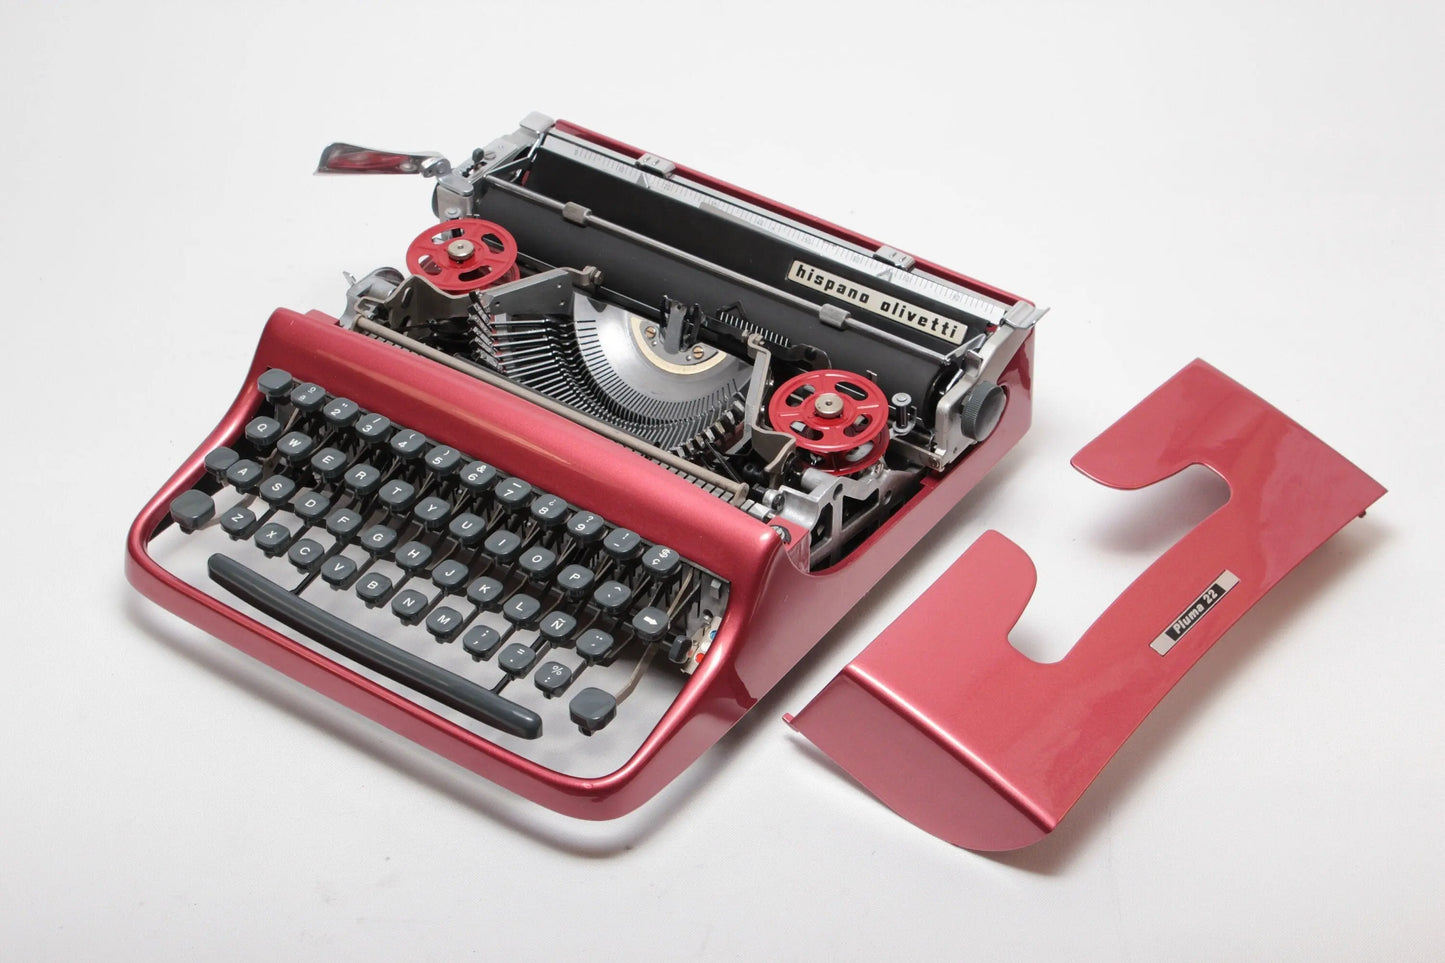 Limited Edition Olivetti Pluma 22 Coral Red Typewriter, Vintage, Manual Portable, Professionally Serviced by Typewriter.Company - ElGranero Typewriter.Company